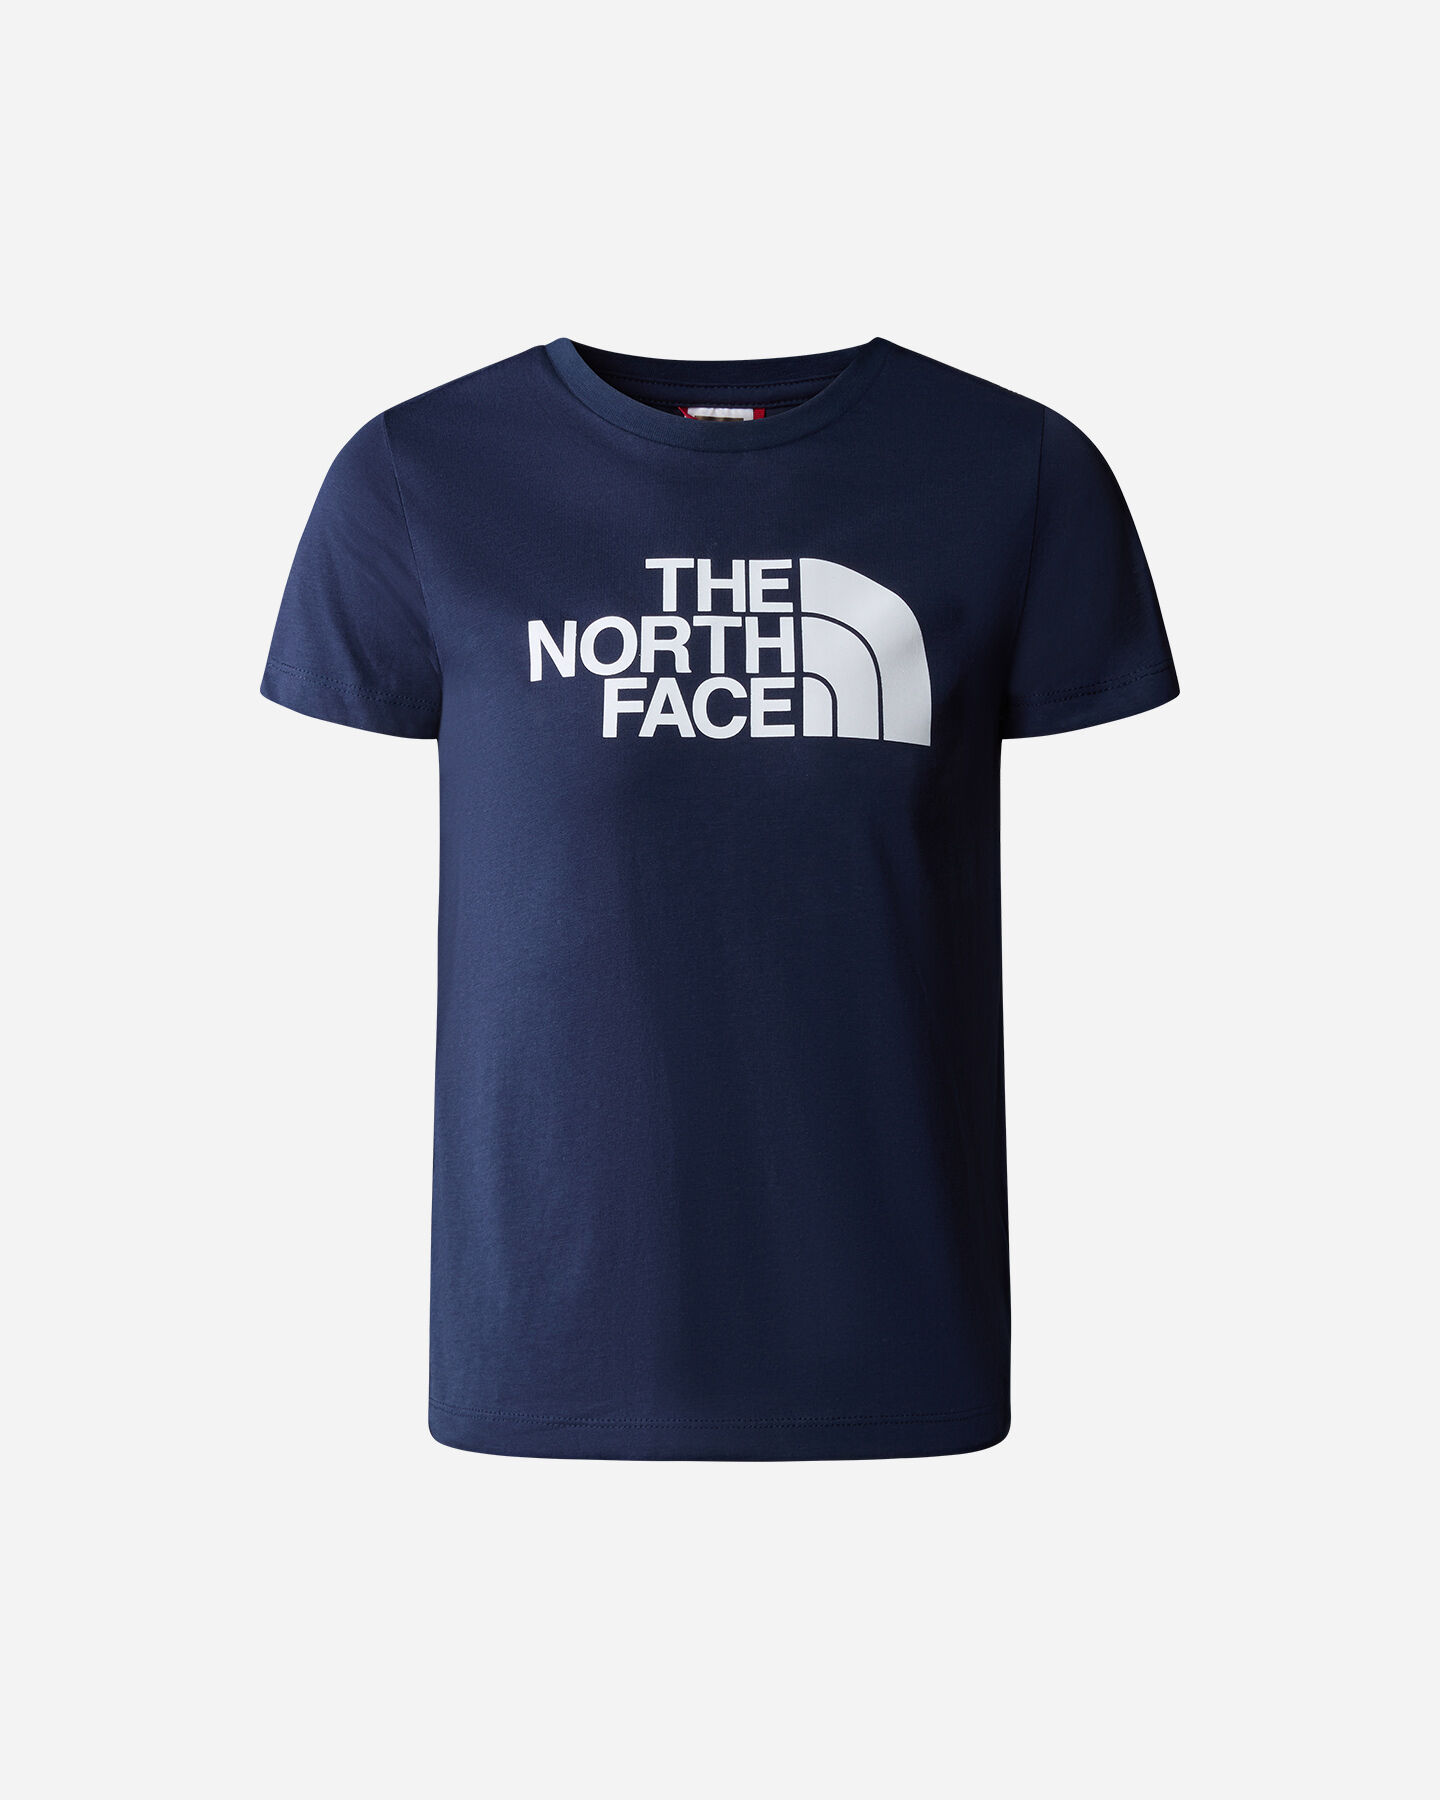  T-Shirt THE NORTH FACE EASY JR S5537407|8K2|S scatto 0